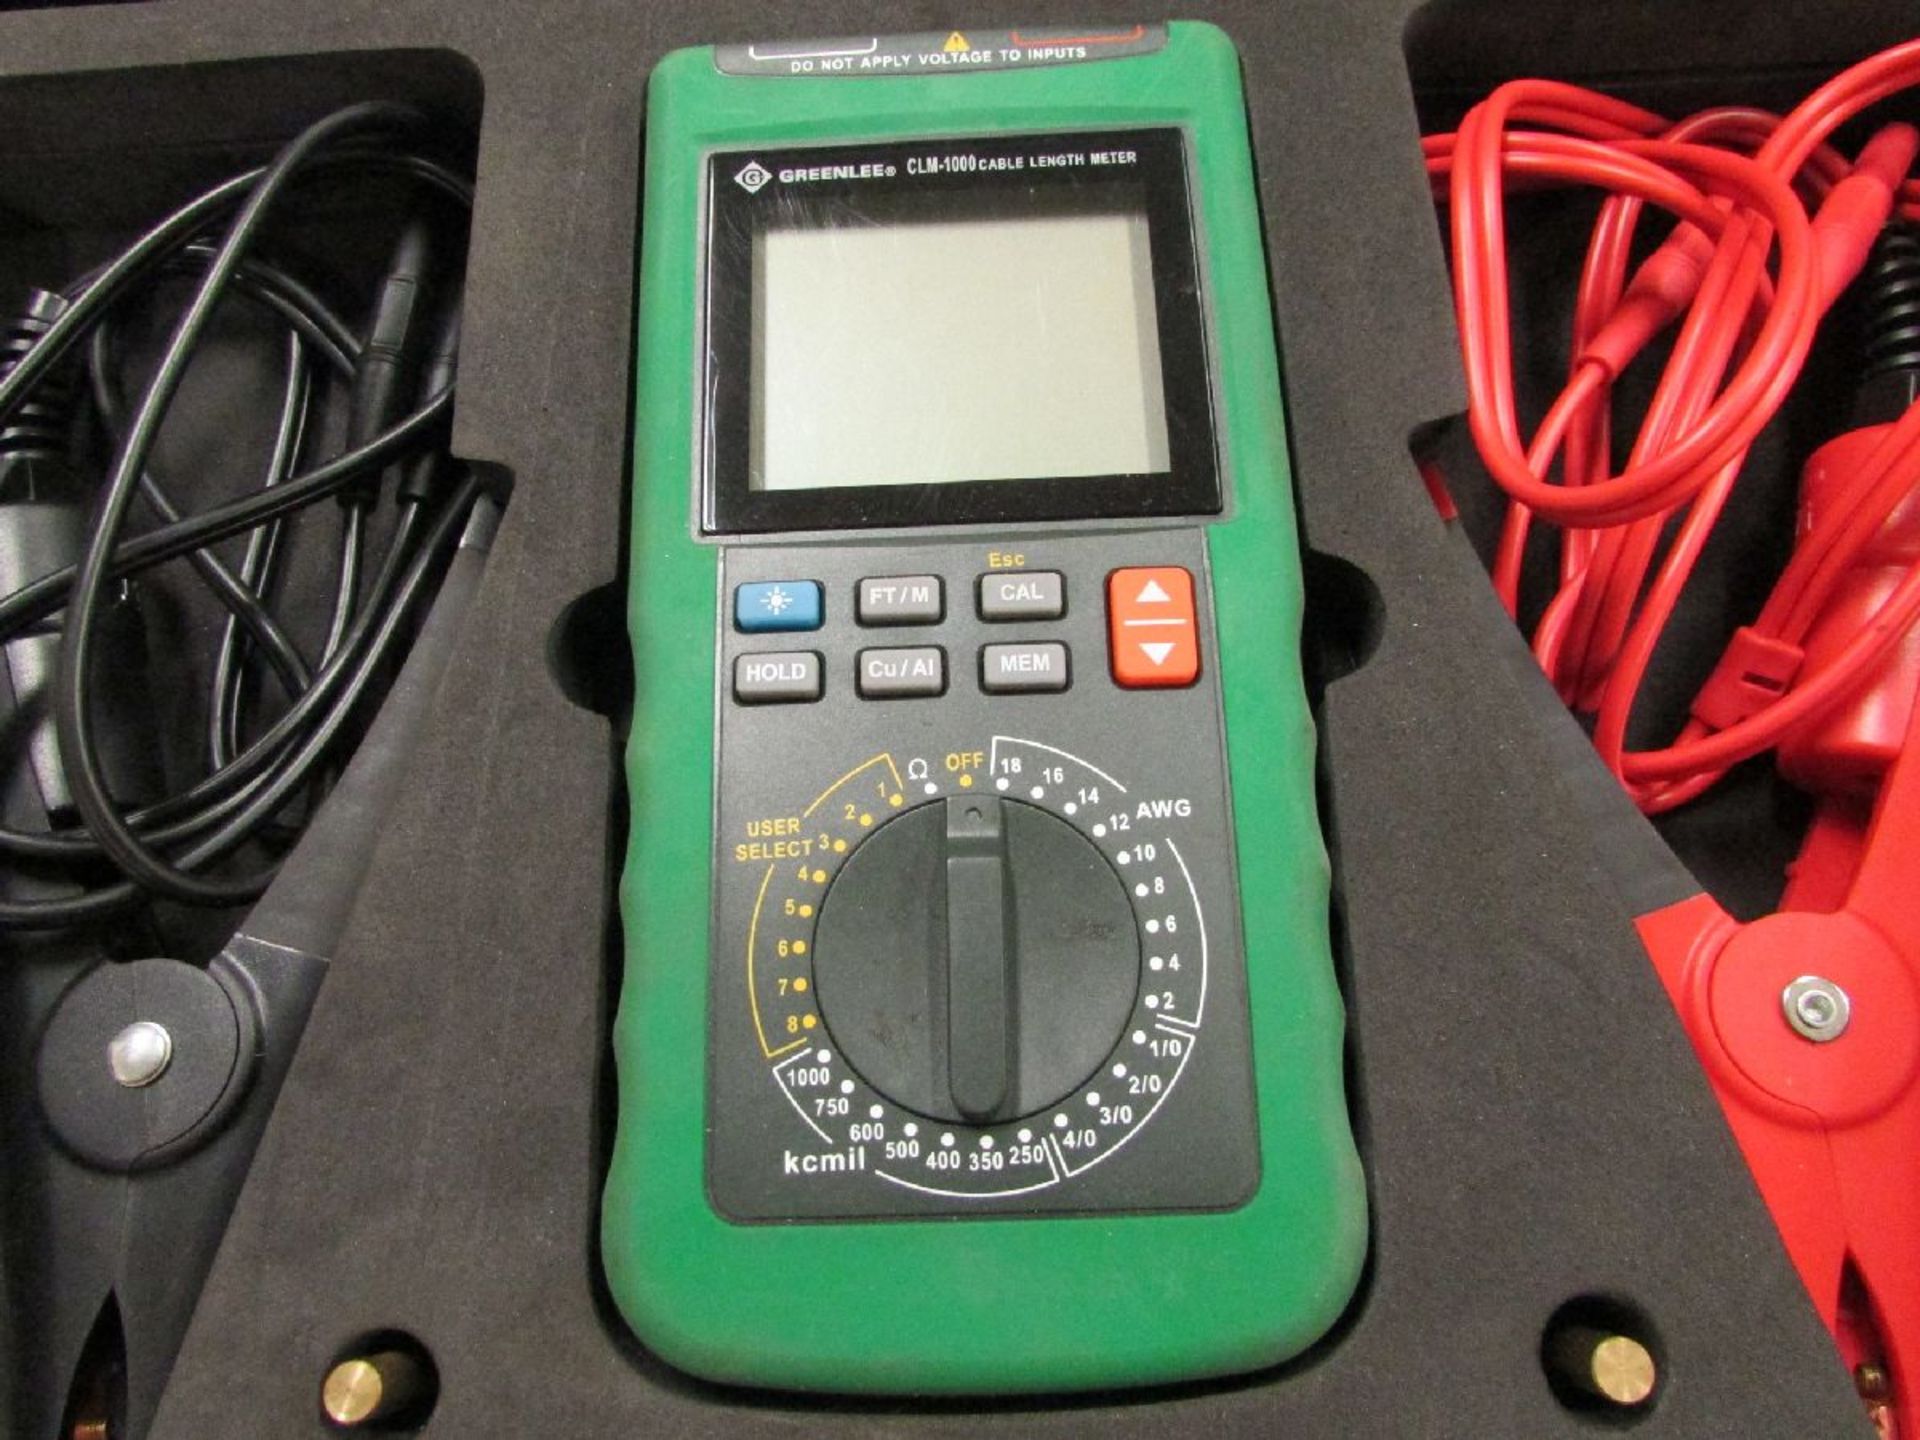 Greenlee Model CLM-1000 Cable Length Meter - Image 2 of 3